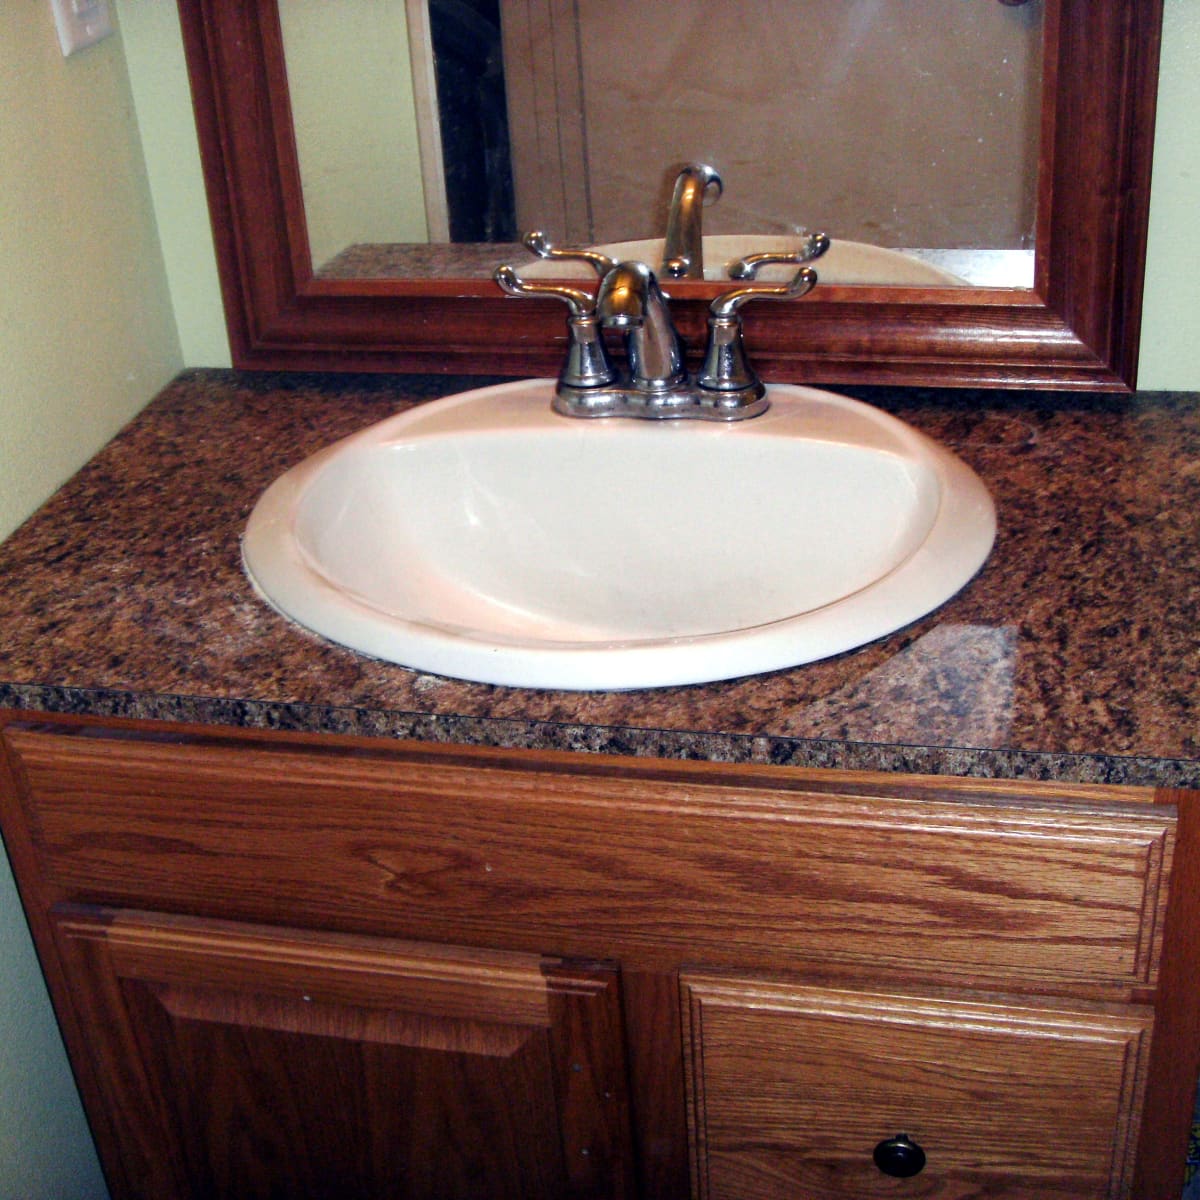 How To Install Laminate Formica For A, Formica Bathroom Vanity